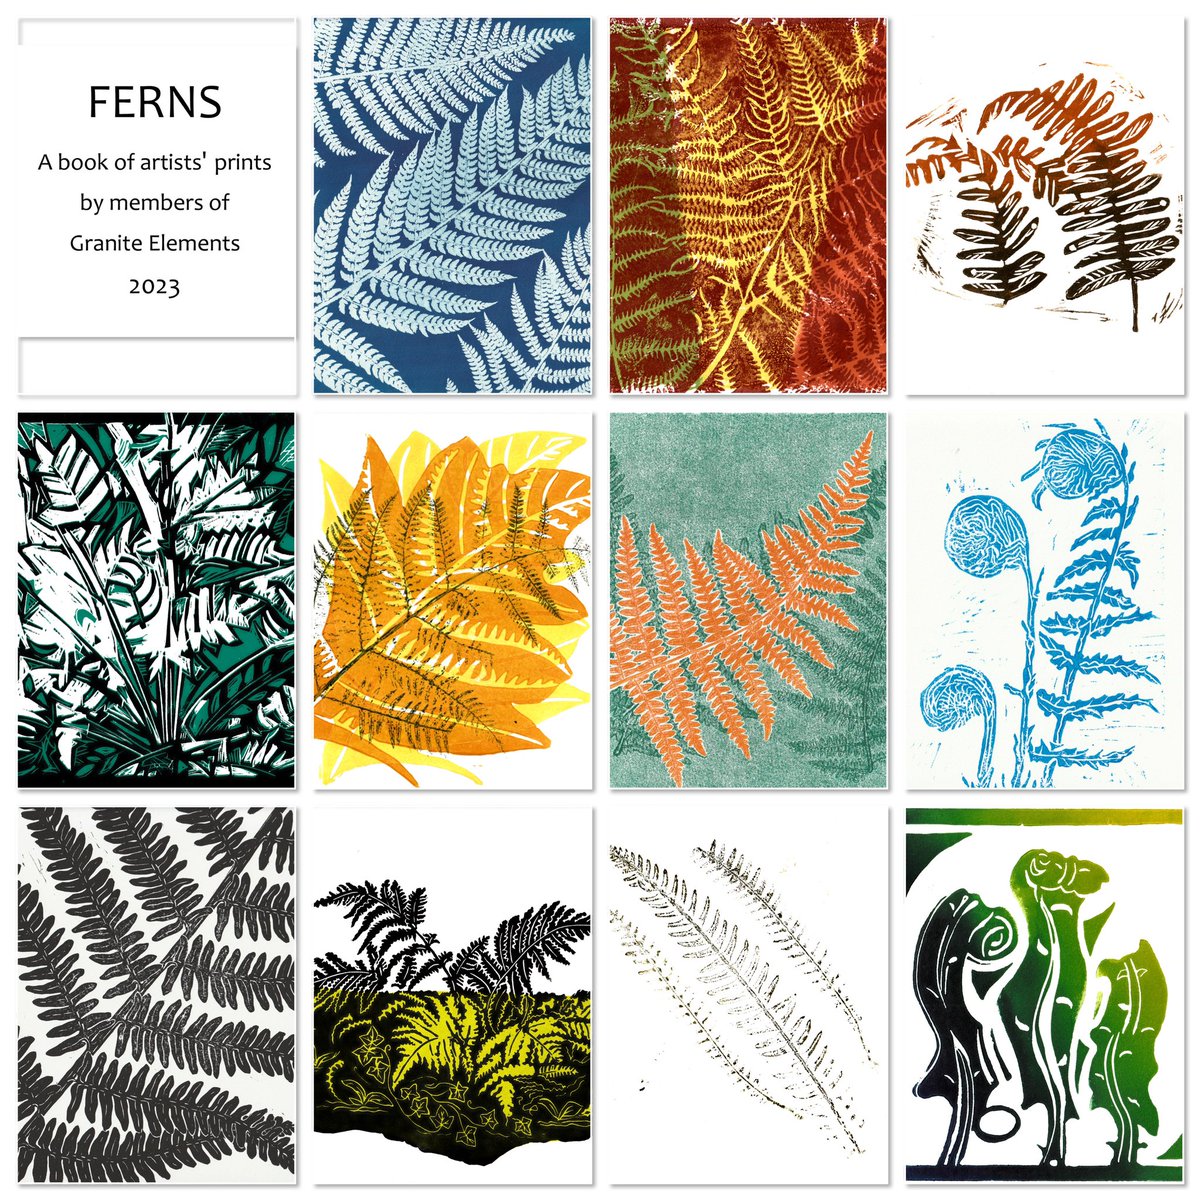 These are the eleven original prints by members of Granite Elements. They’ve been put together in a spectacular book which can be seen at @ullacombefarm New Barn Gallery on 13th and 14th May. #printmaking #ferns #handmadebooks 😀🌿